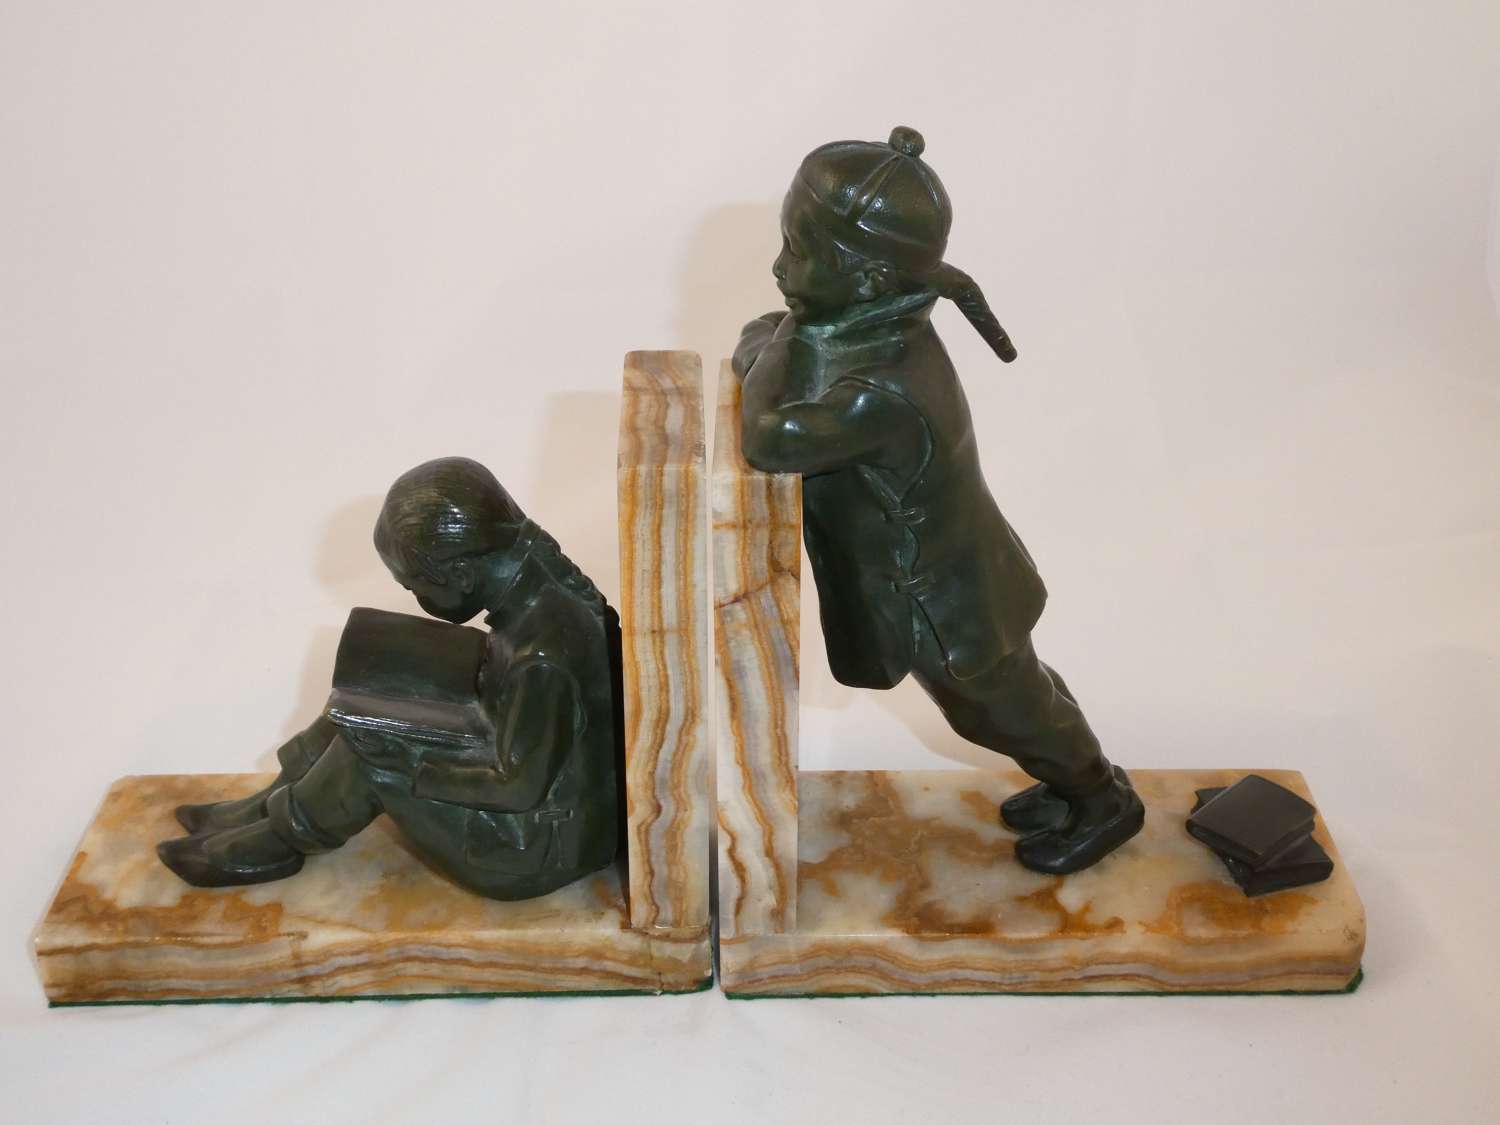 Pair of bookends